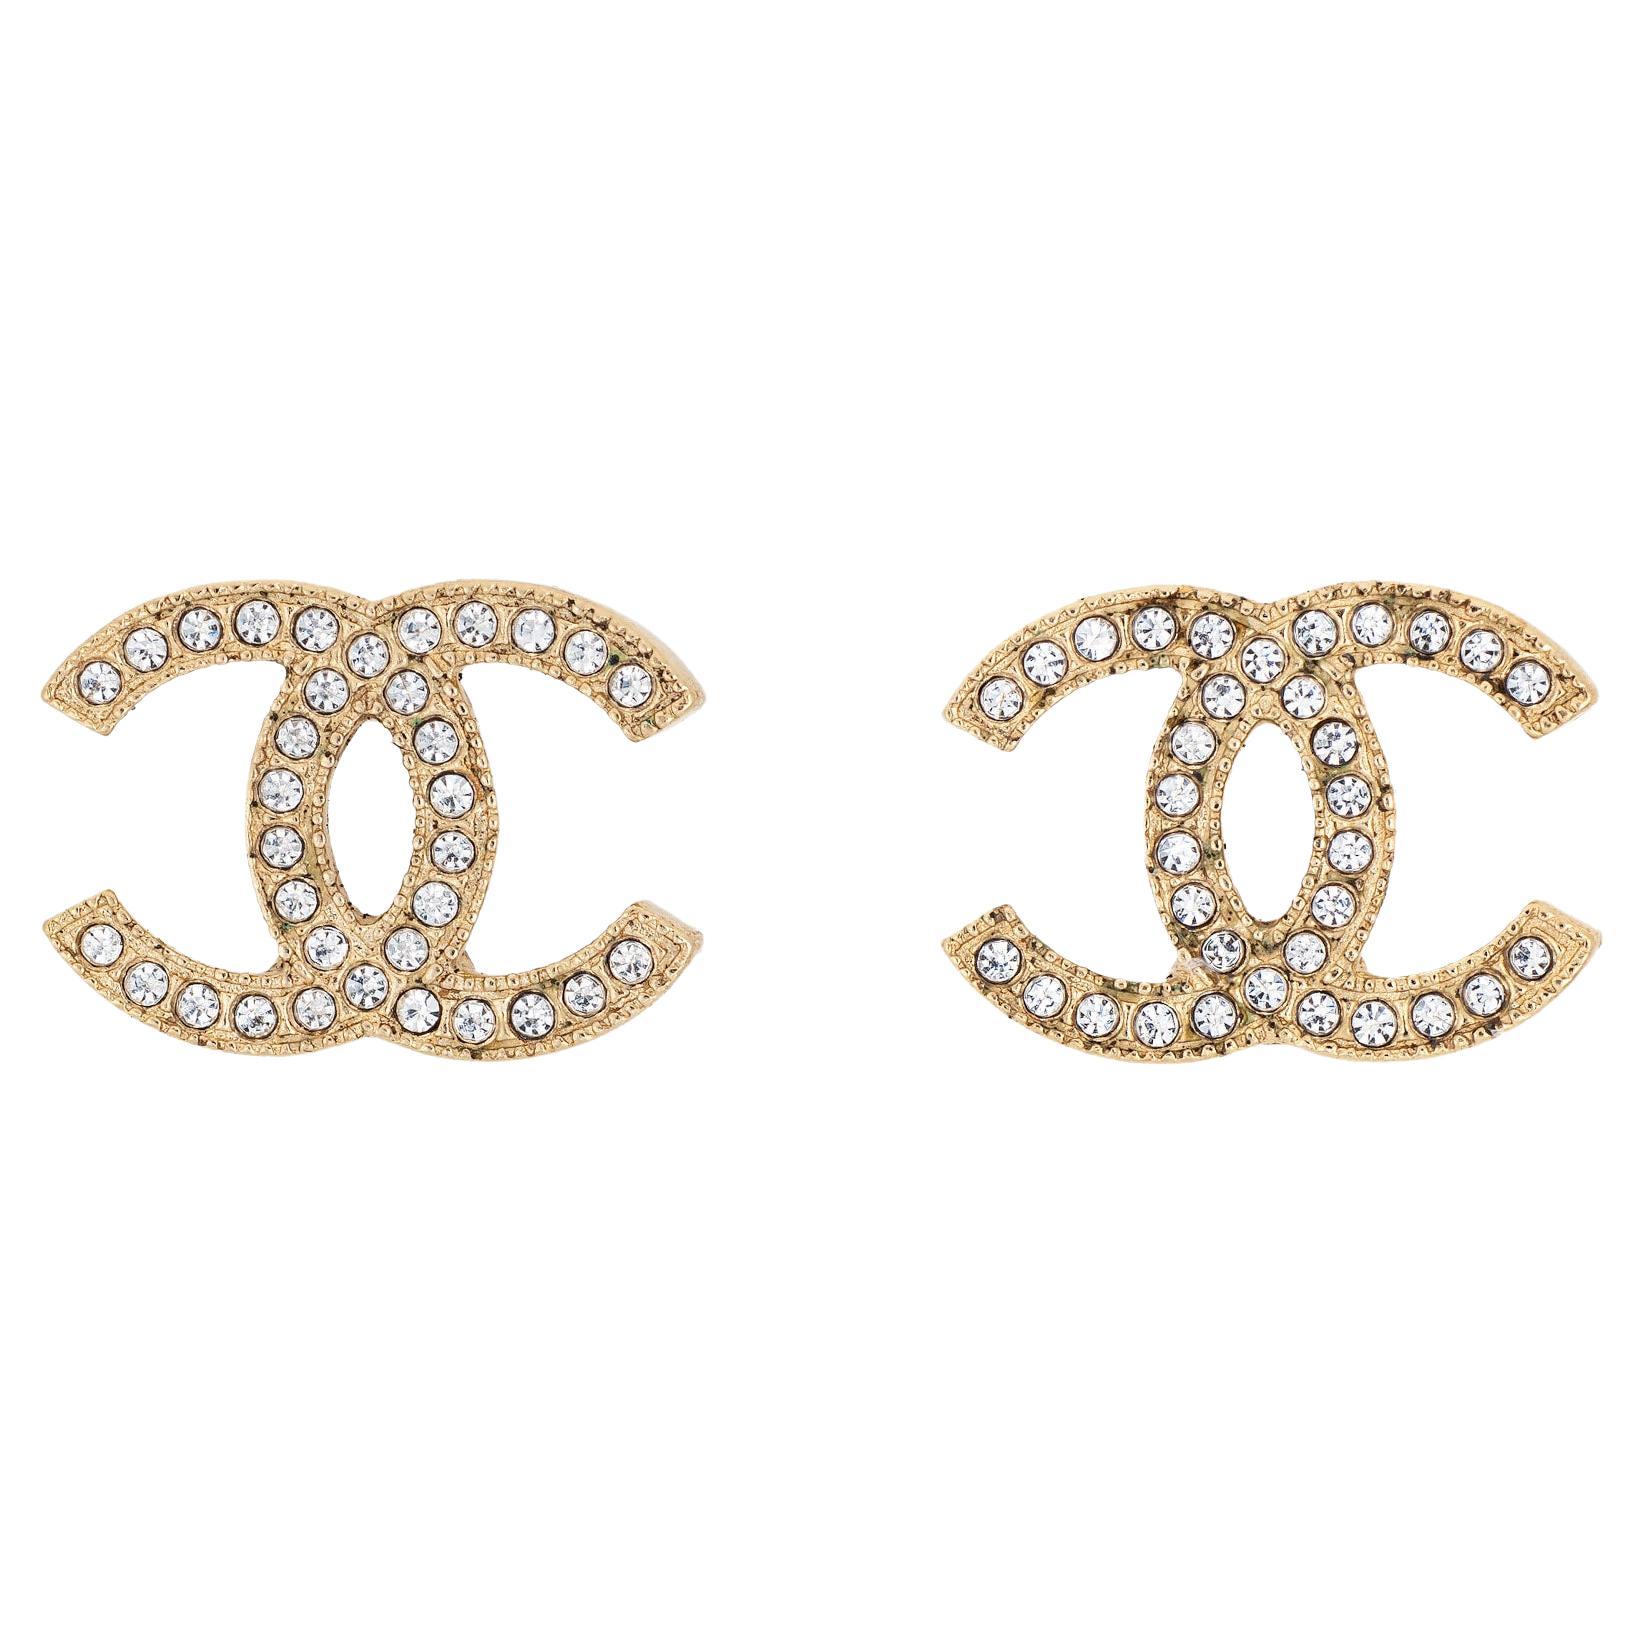 2014 Chanel CC Logo Crystal Earrings Studs Yellow Gold Tone at